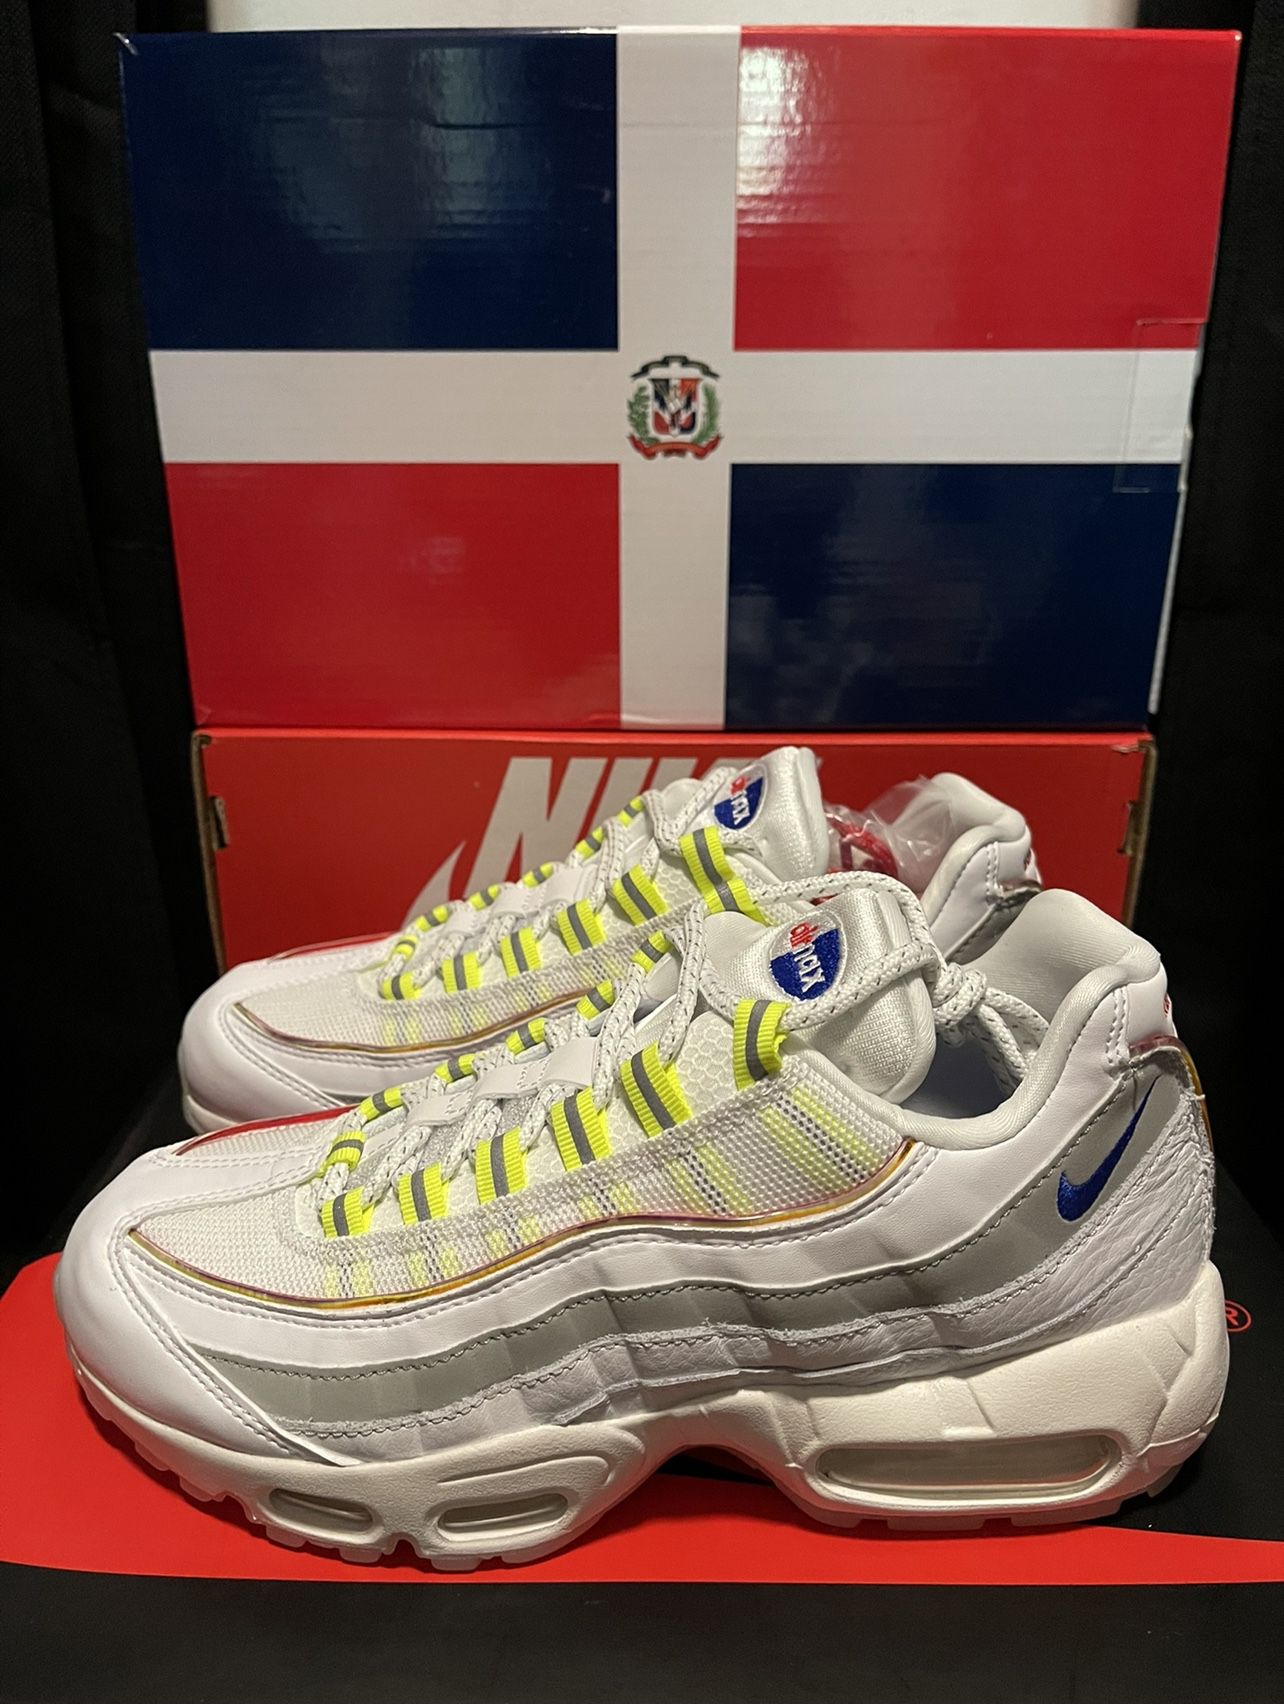 Dominican Republic Independence Nike Air Max 95 De lo Mío for in Miramar, FL - OfferUp